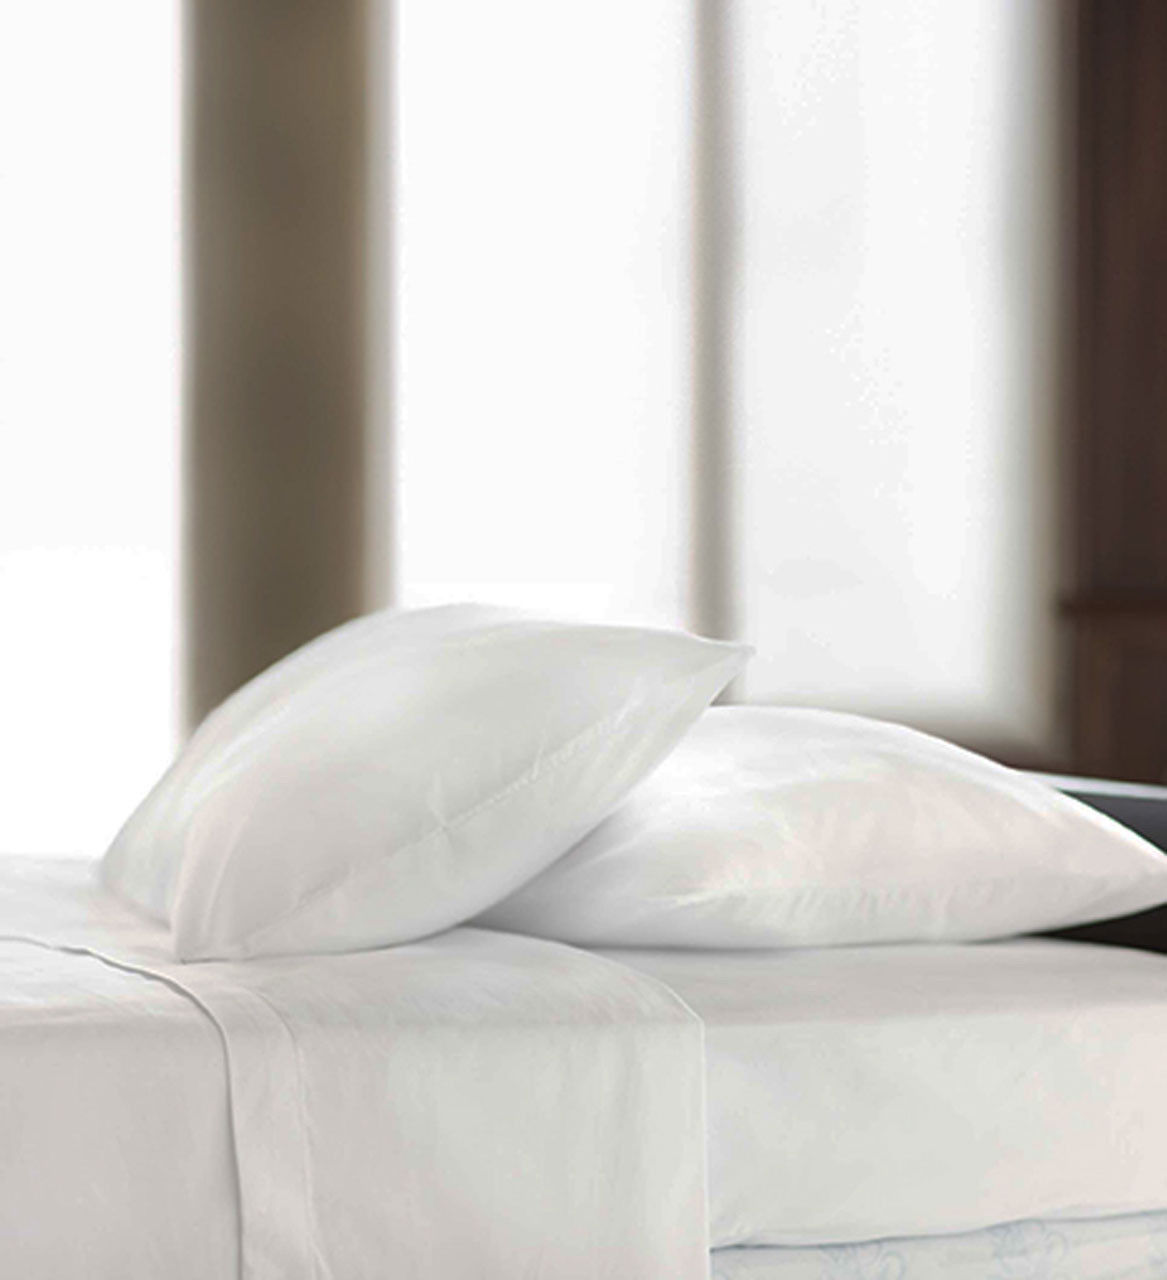 Does softness of Centium Satin Sheets improve with time?